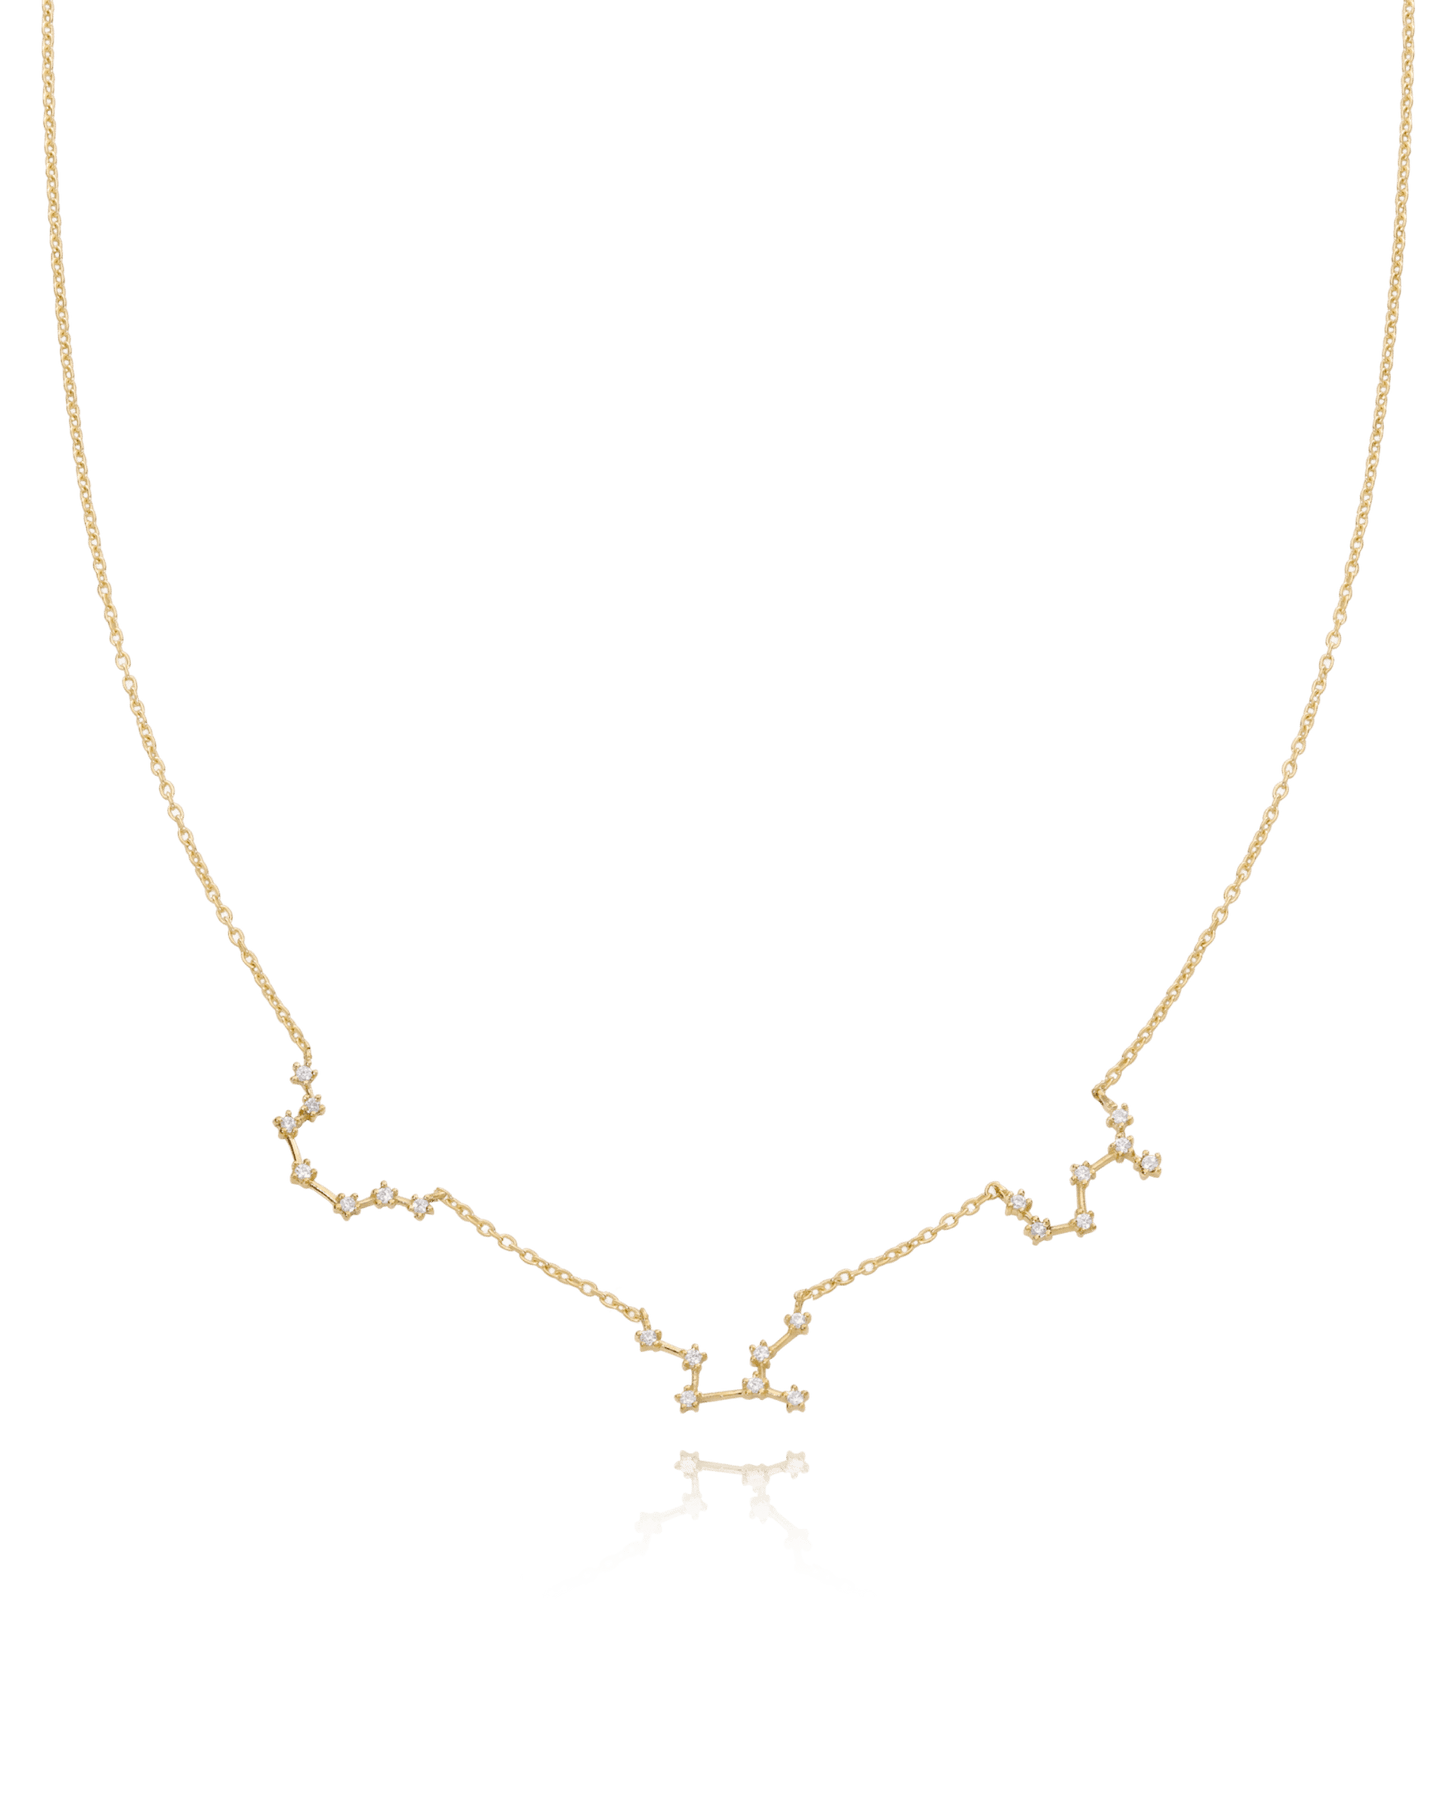 Sets of Constellation Necklaces - 925 Sterling Silver Necklaces magal-dev 1 Constellation 